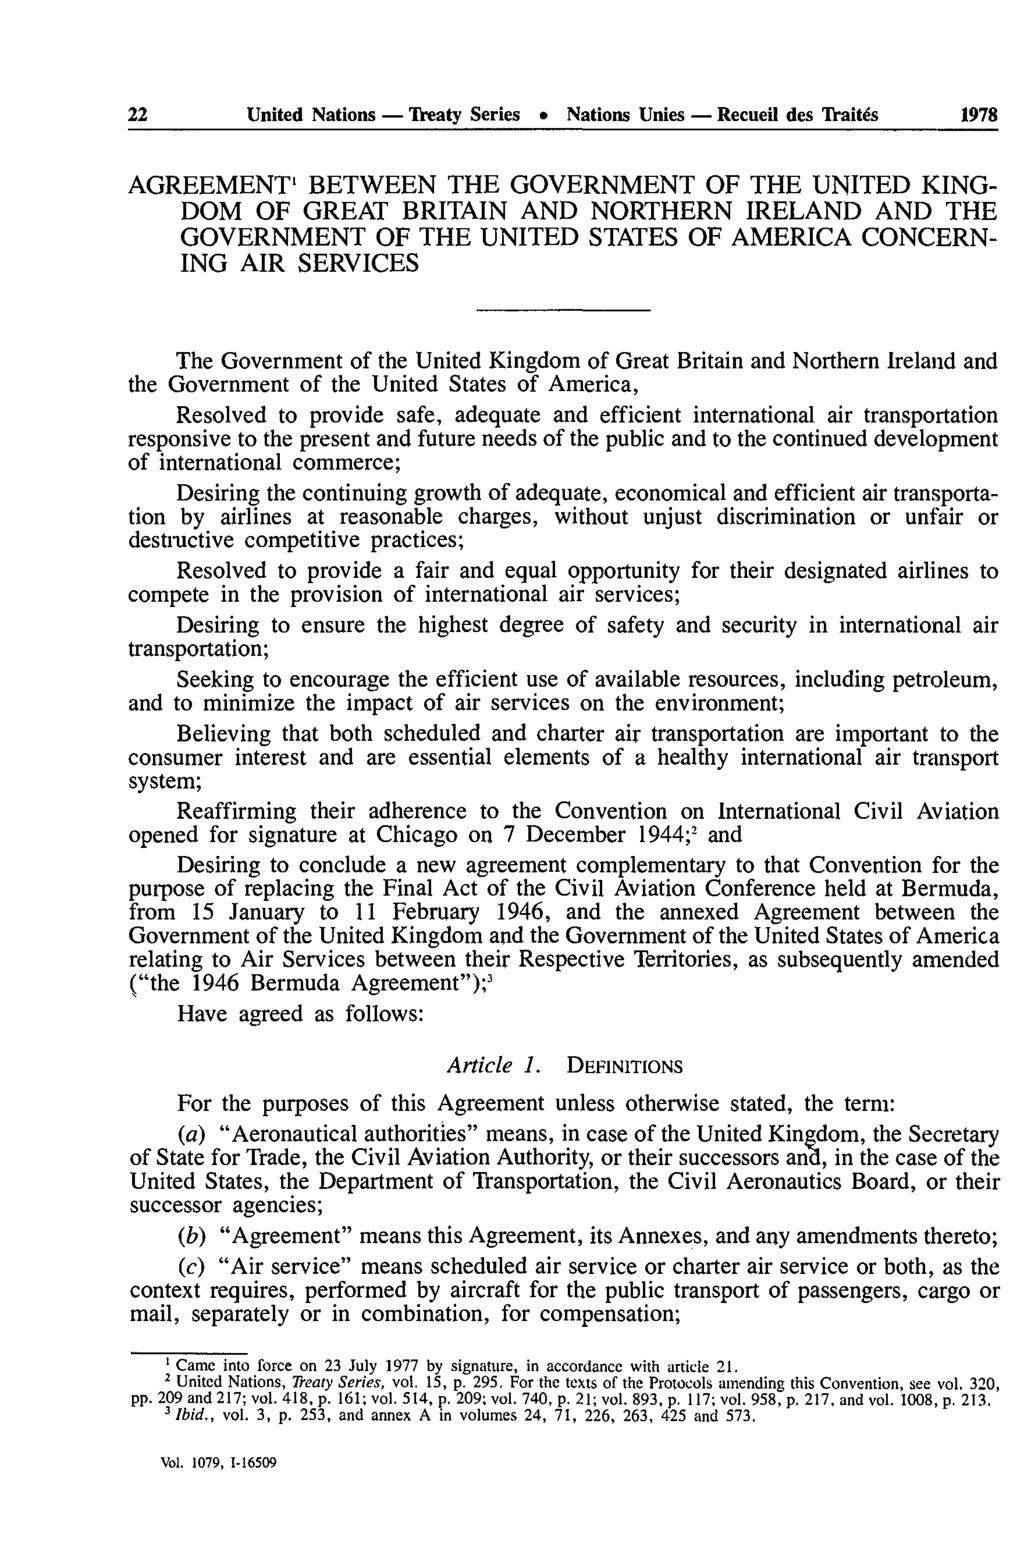 22 United Nations TVcaty Séries Nations Unies Recueil des TVaités 1978 AGREEMENT 1 BETWEEN THE GOVERNMENT OF THE UNITED KING DOM OF GREAT BRITAIN AND NORTHERN IRELAND AND THE GOVERNMENT OF THE UNITED